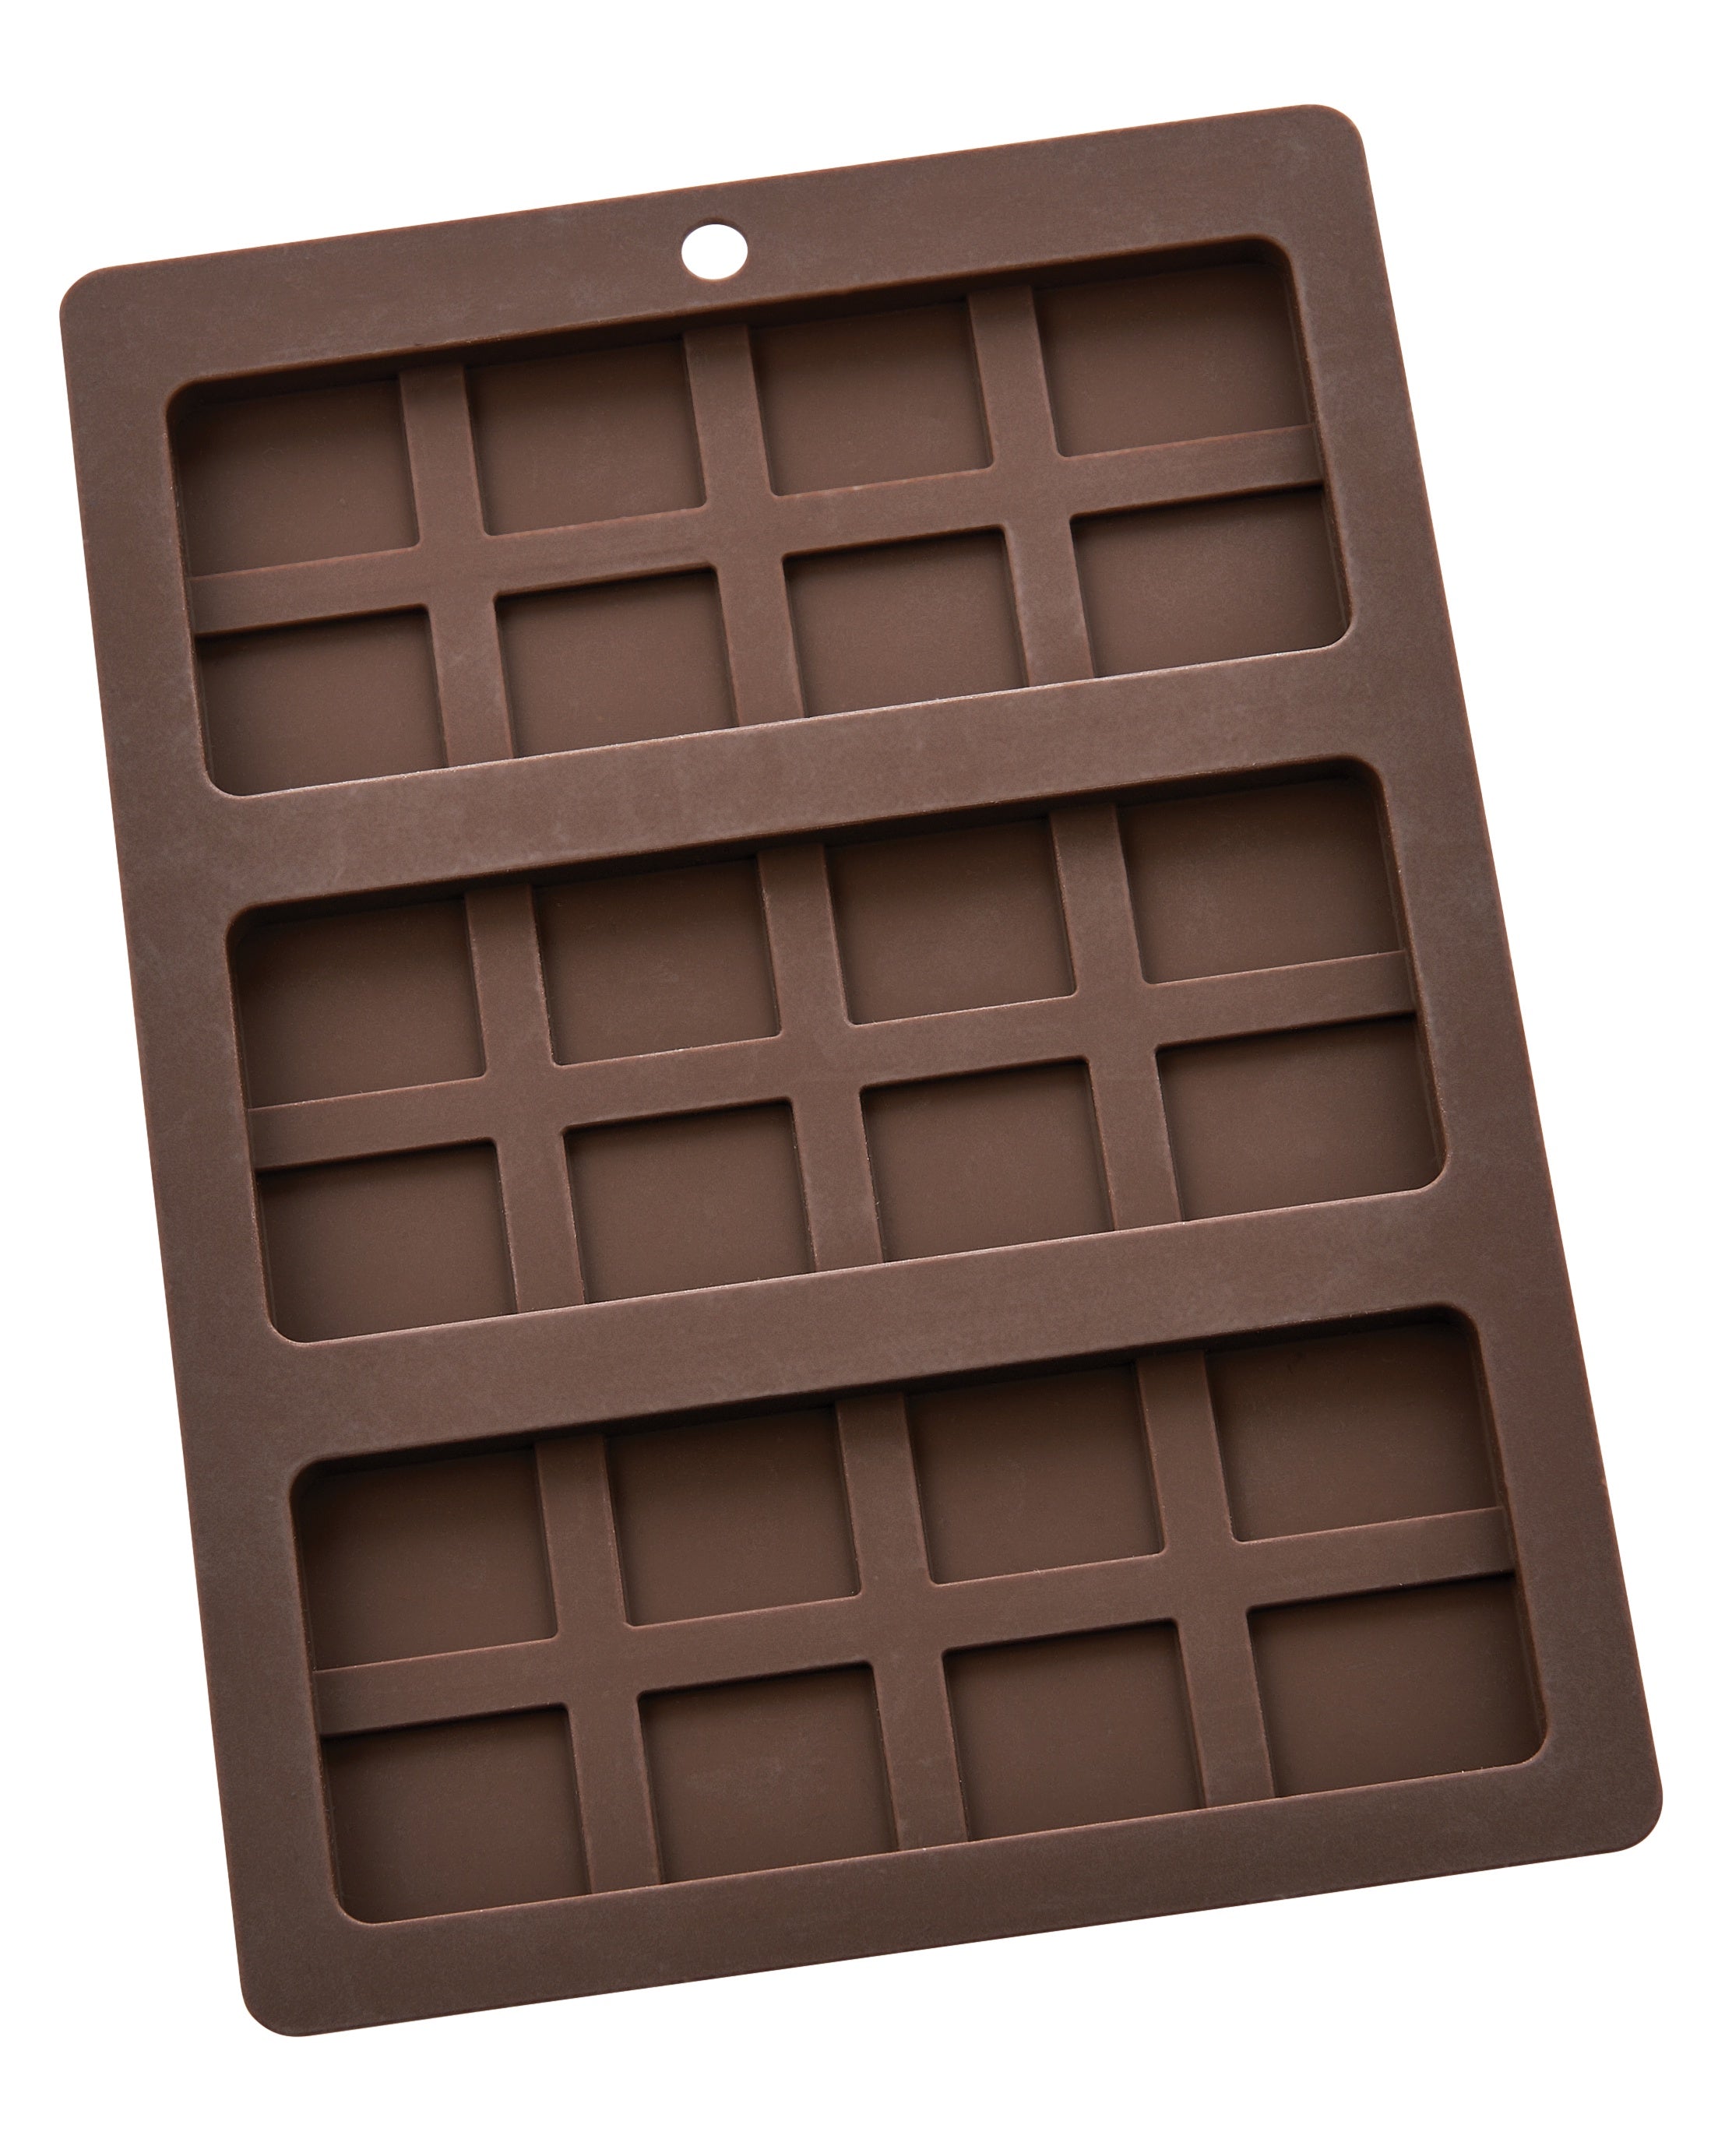 Mrs. Anderson's Chocolate Bar Mold